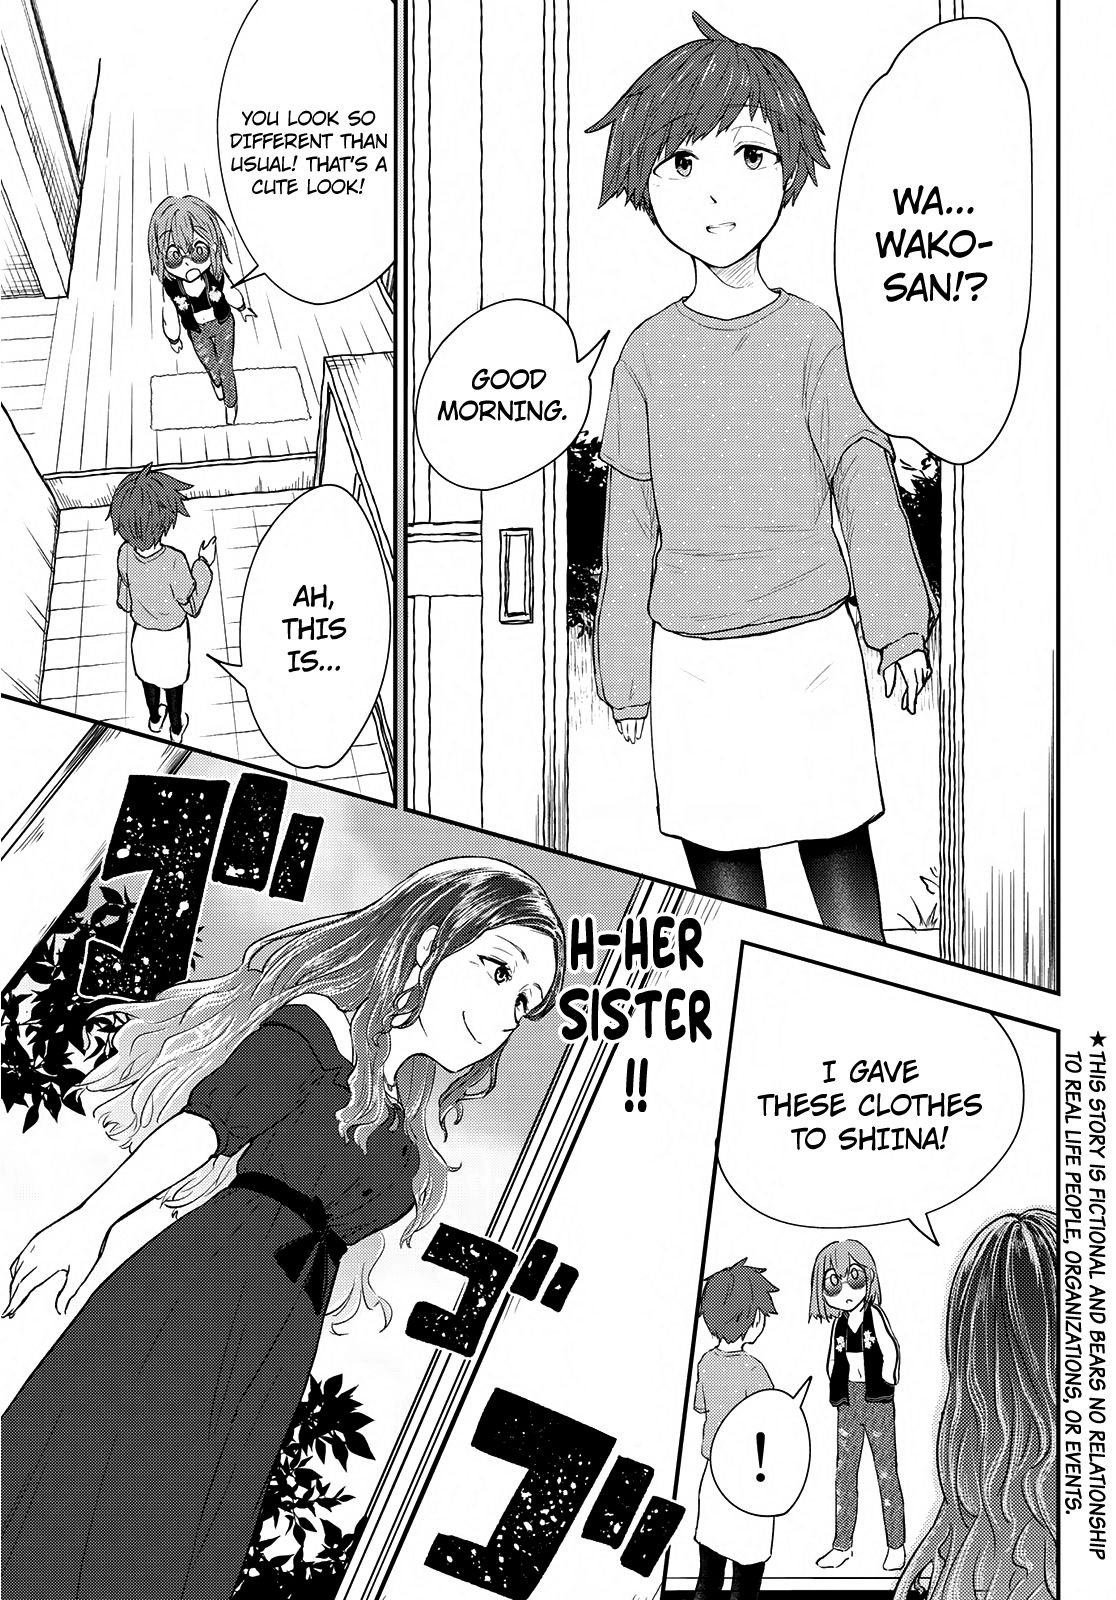 Hiyumi's Country Road - chapter 8 - #6